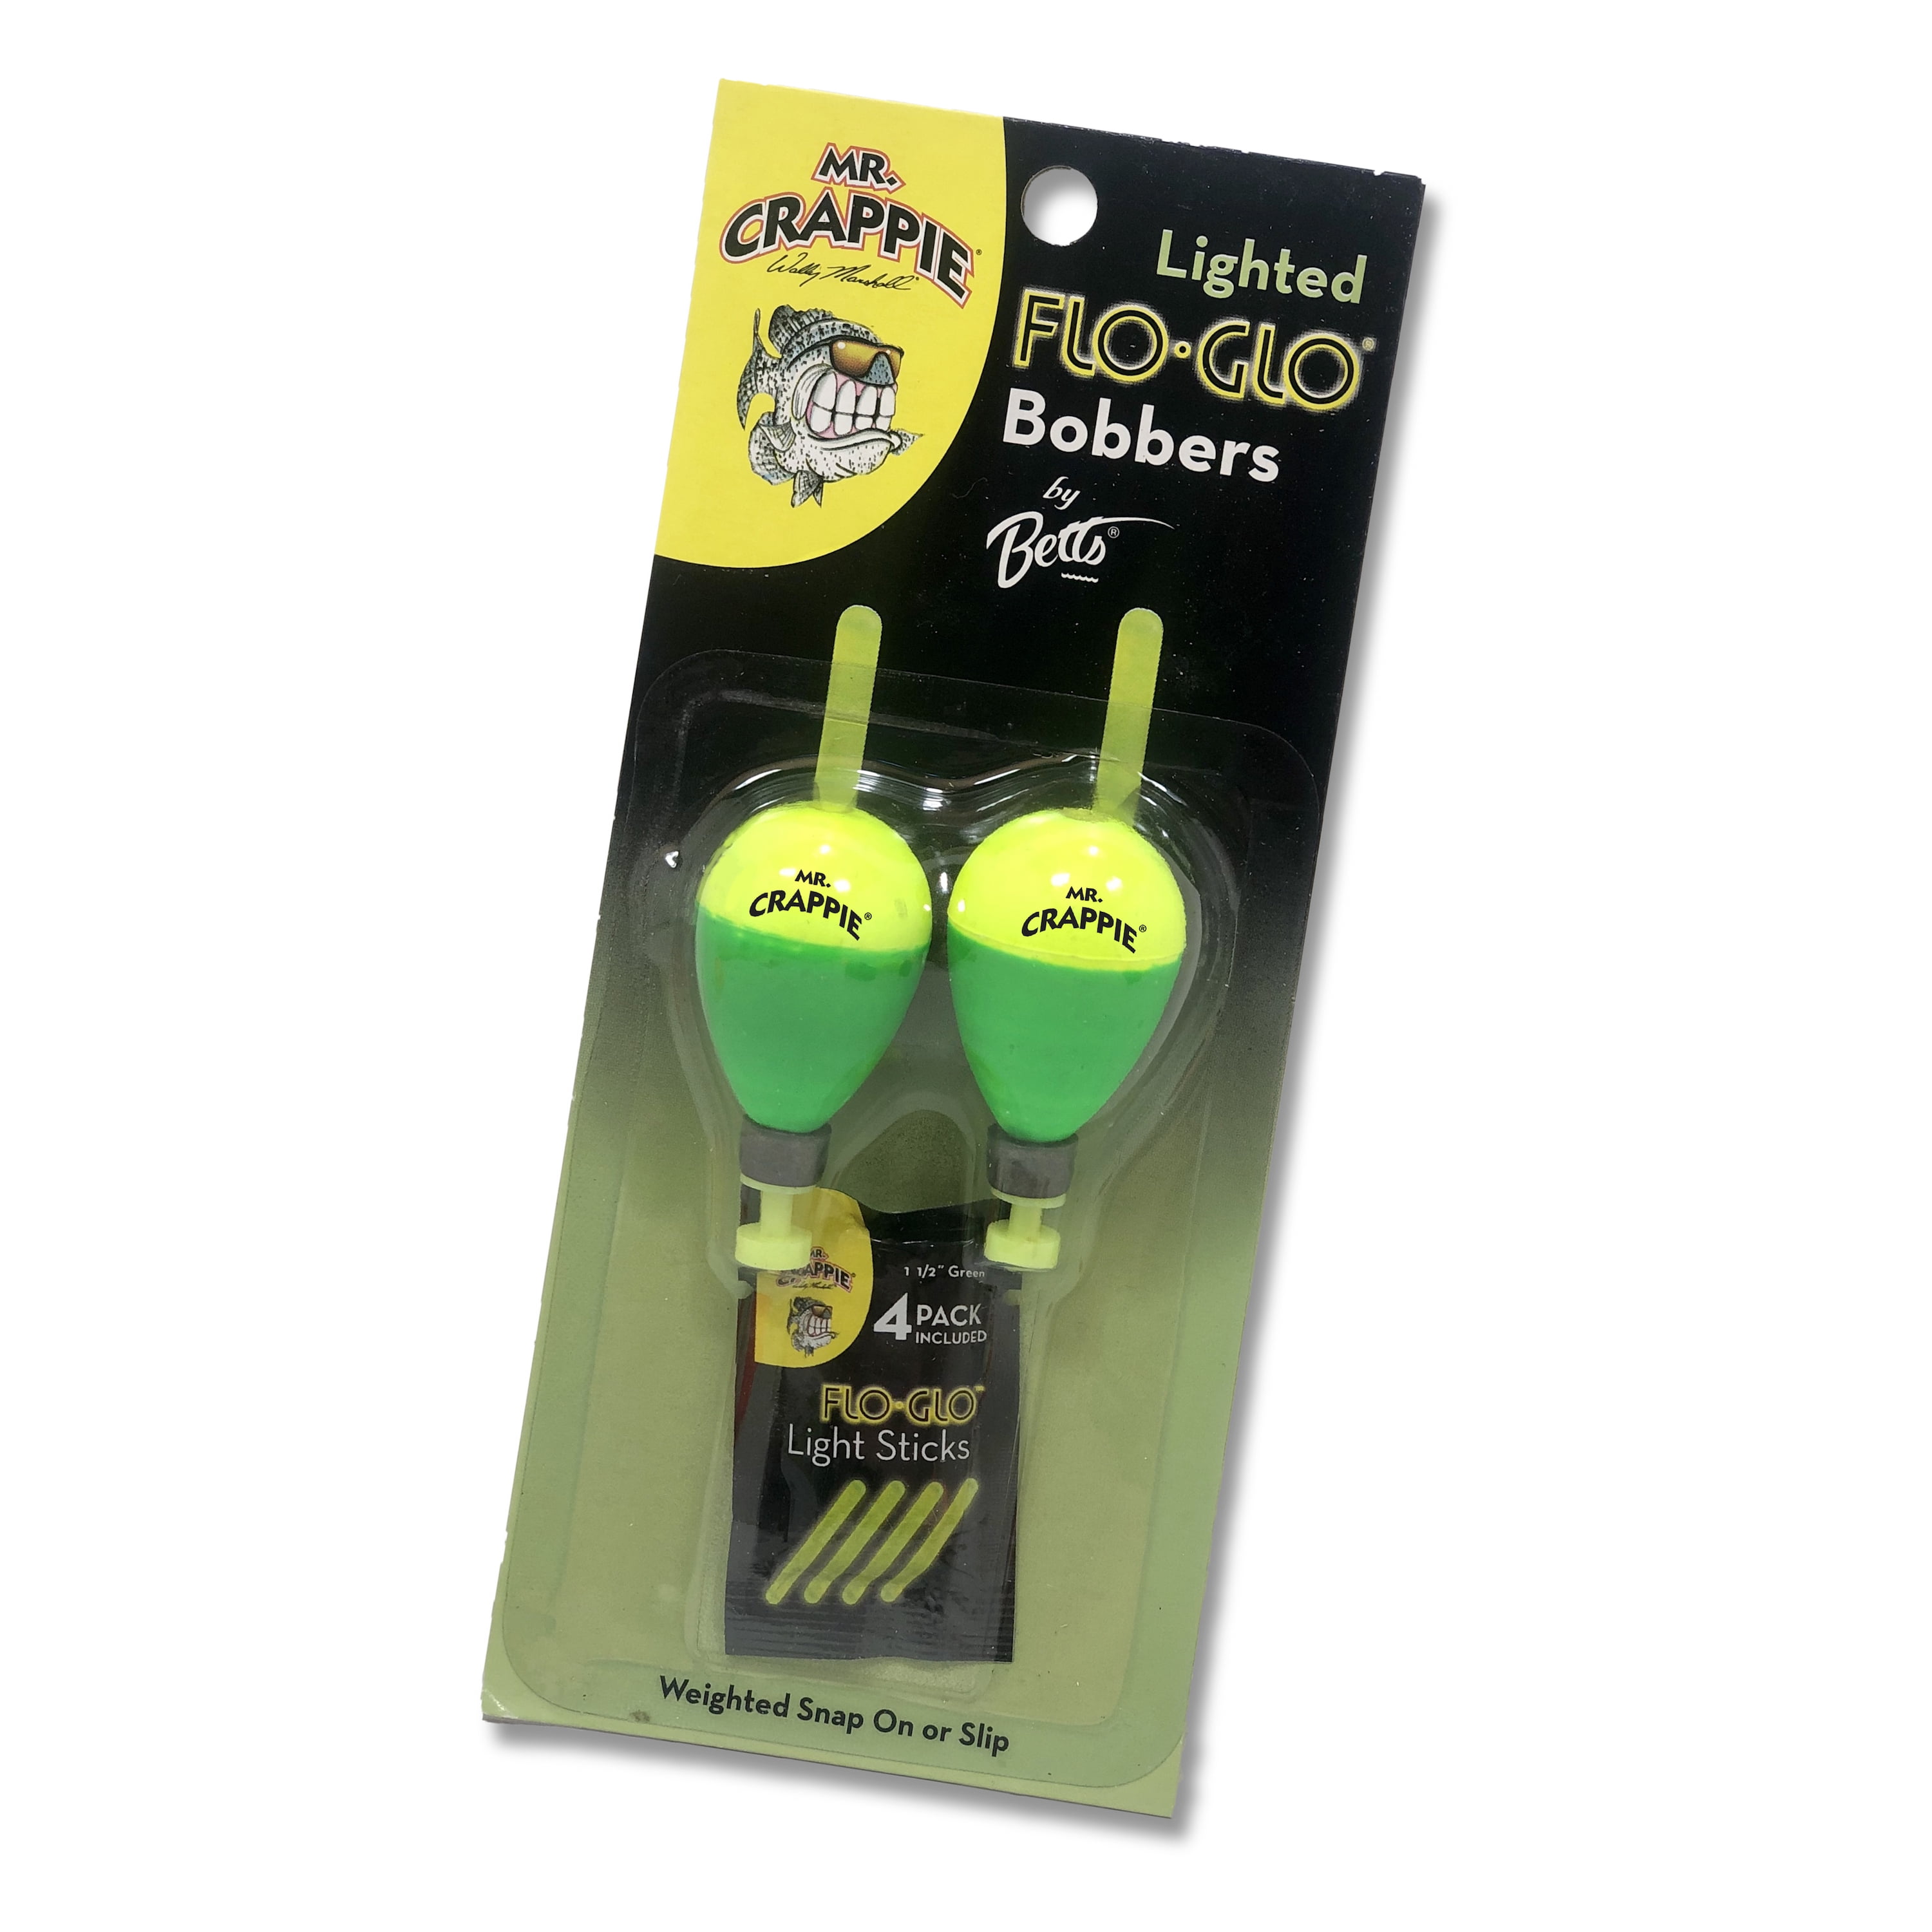 Mr. Crappie MP150W-2YG-GL Flo-Glo Lighted Bobbers, 1-1/2, Pear,  Yellow/Green, 2-Pack 